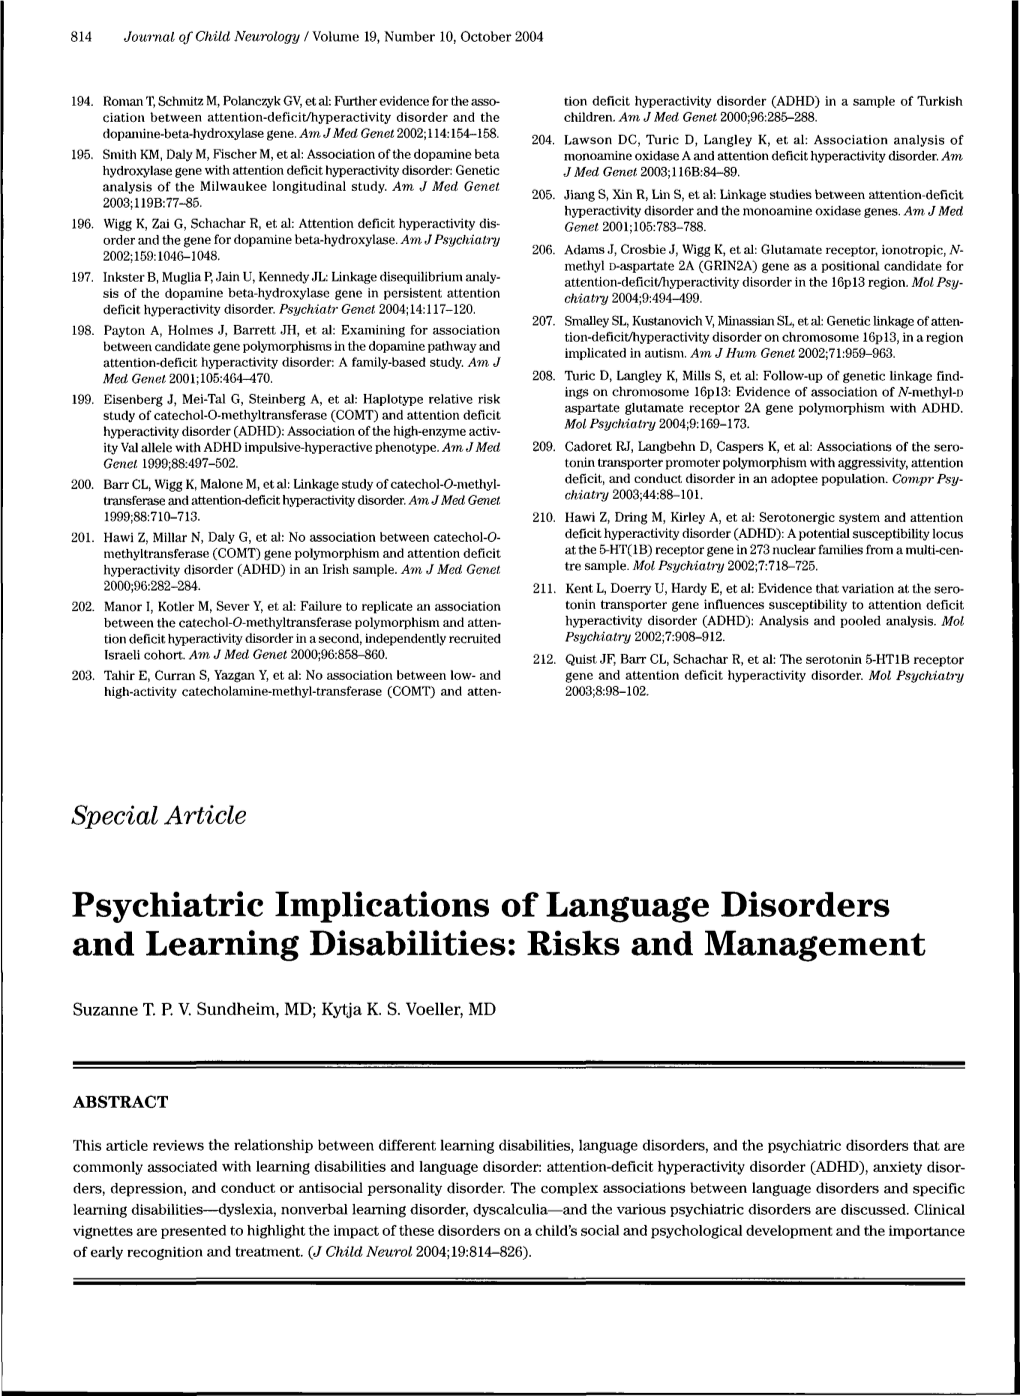 Psychiatric Implications of Language Disorders and Learning Disabilities: Risks and Management